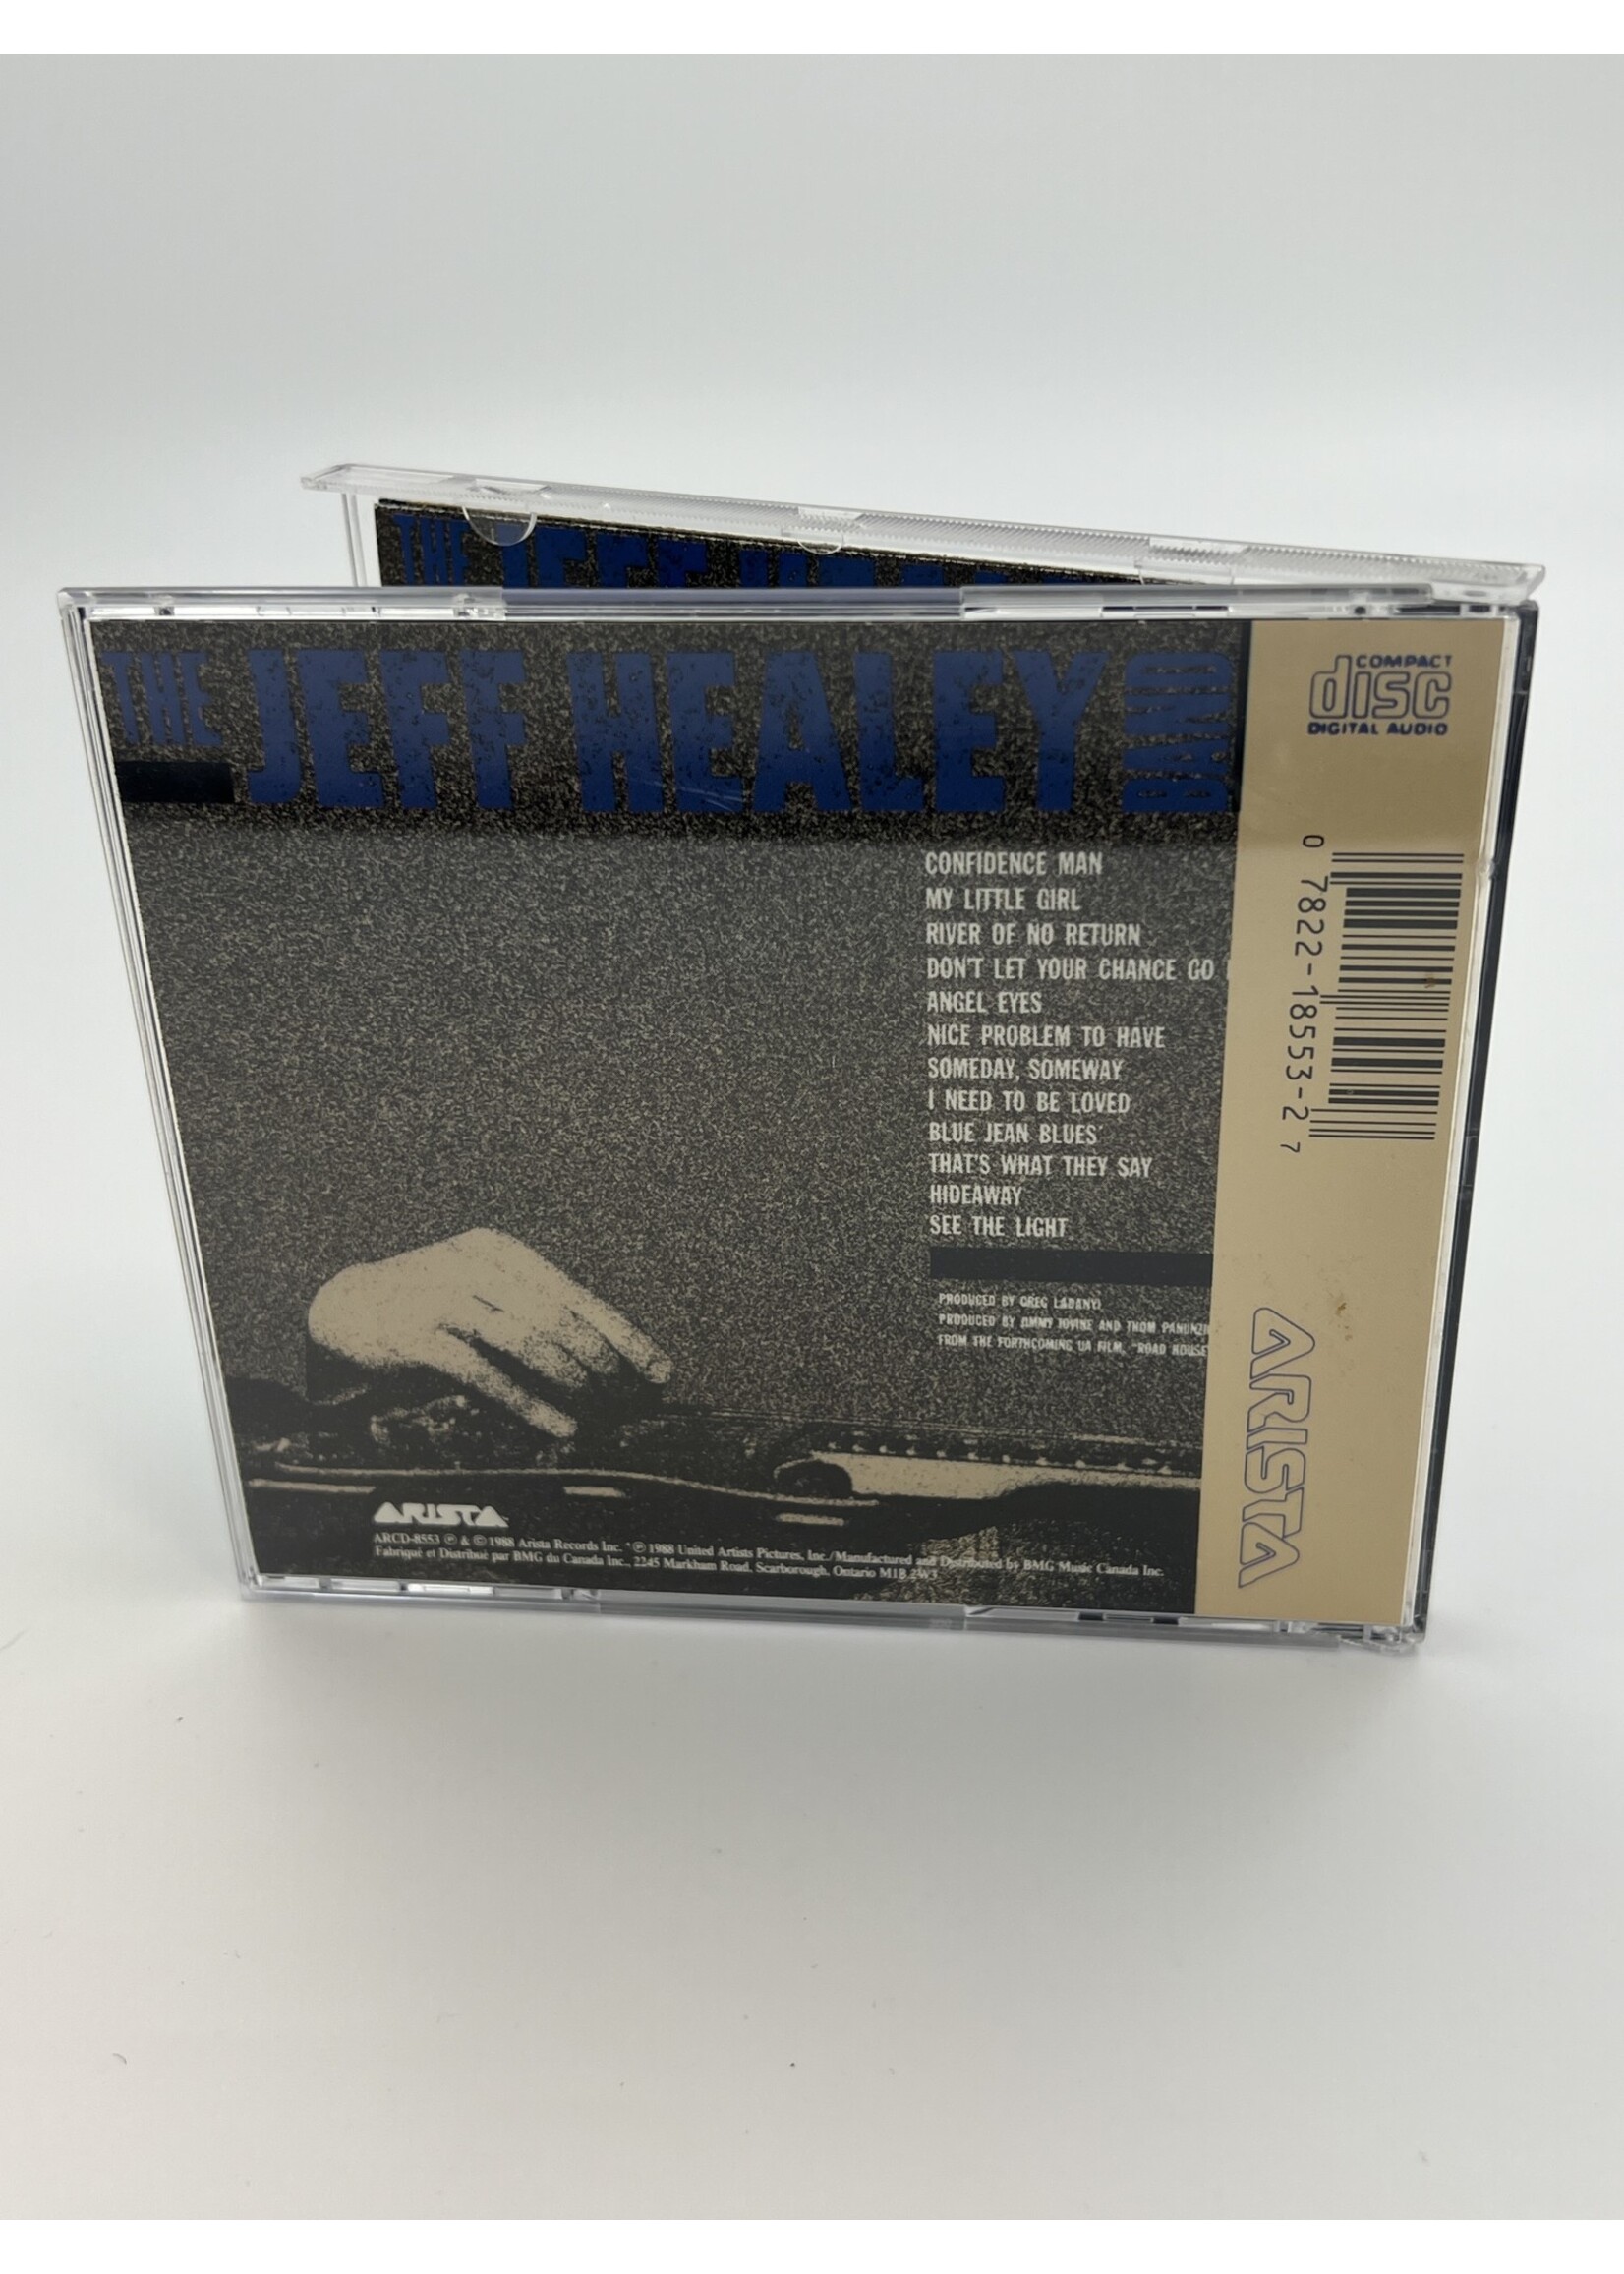 CD The Jeff Healey Band See The Light CD